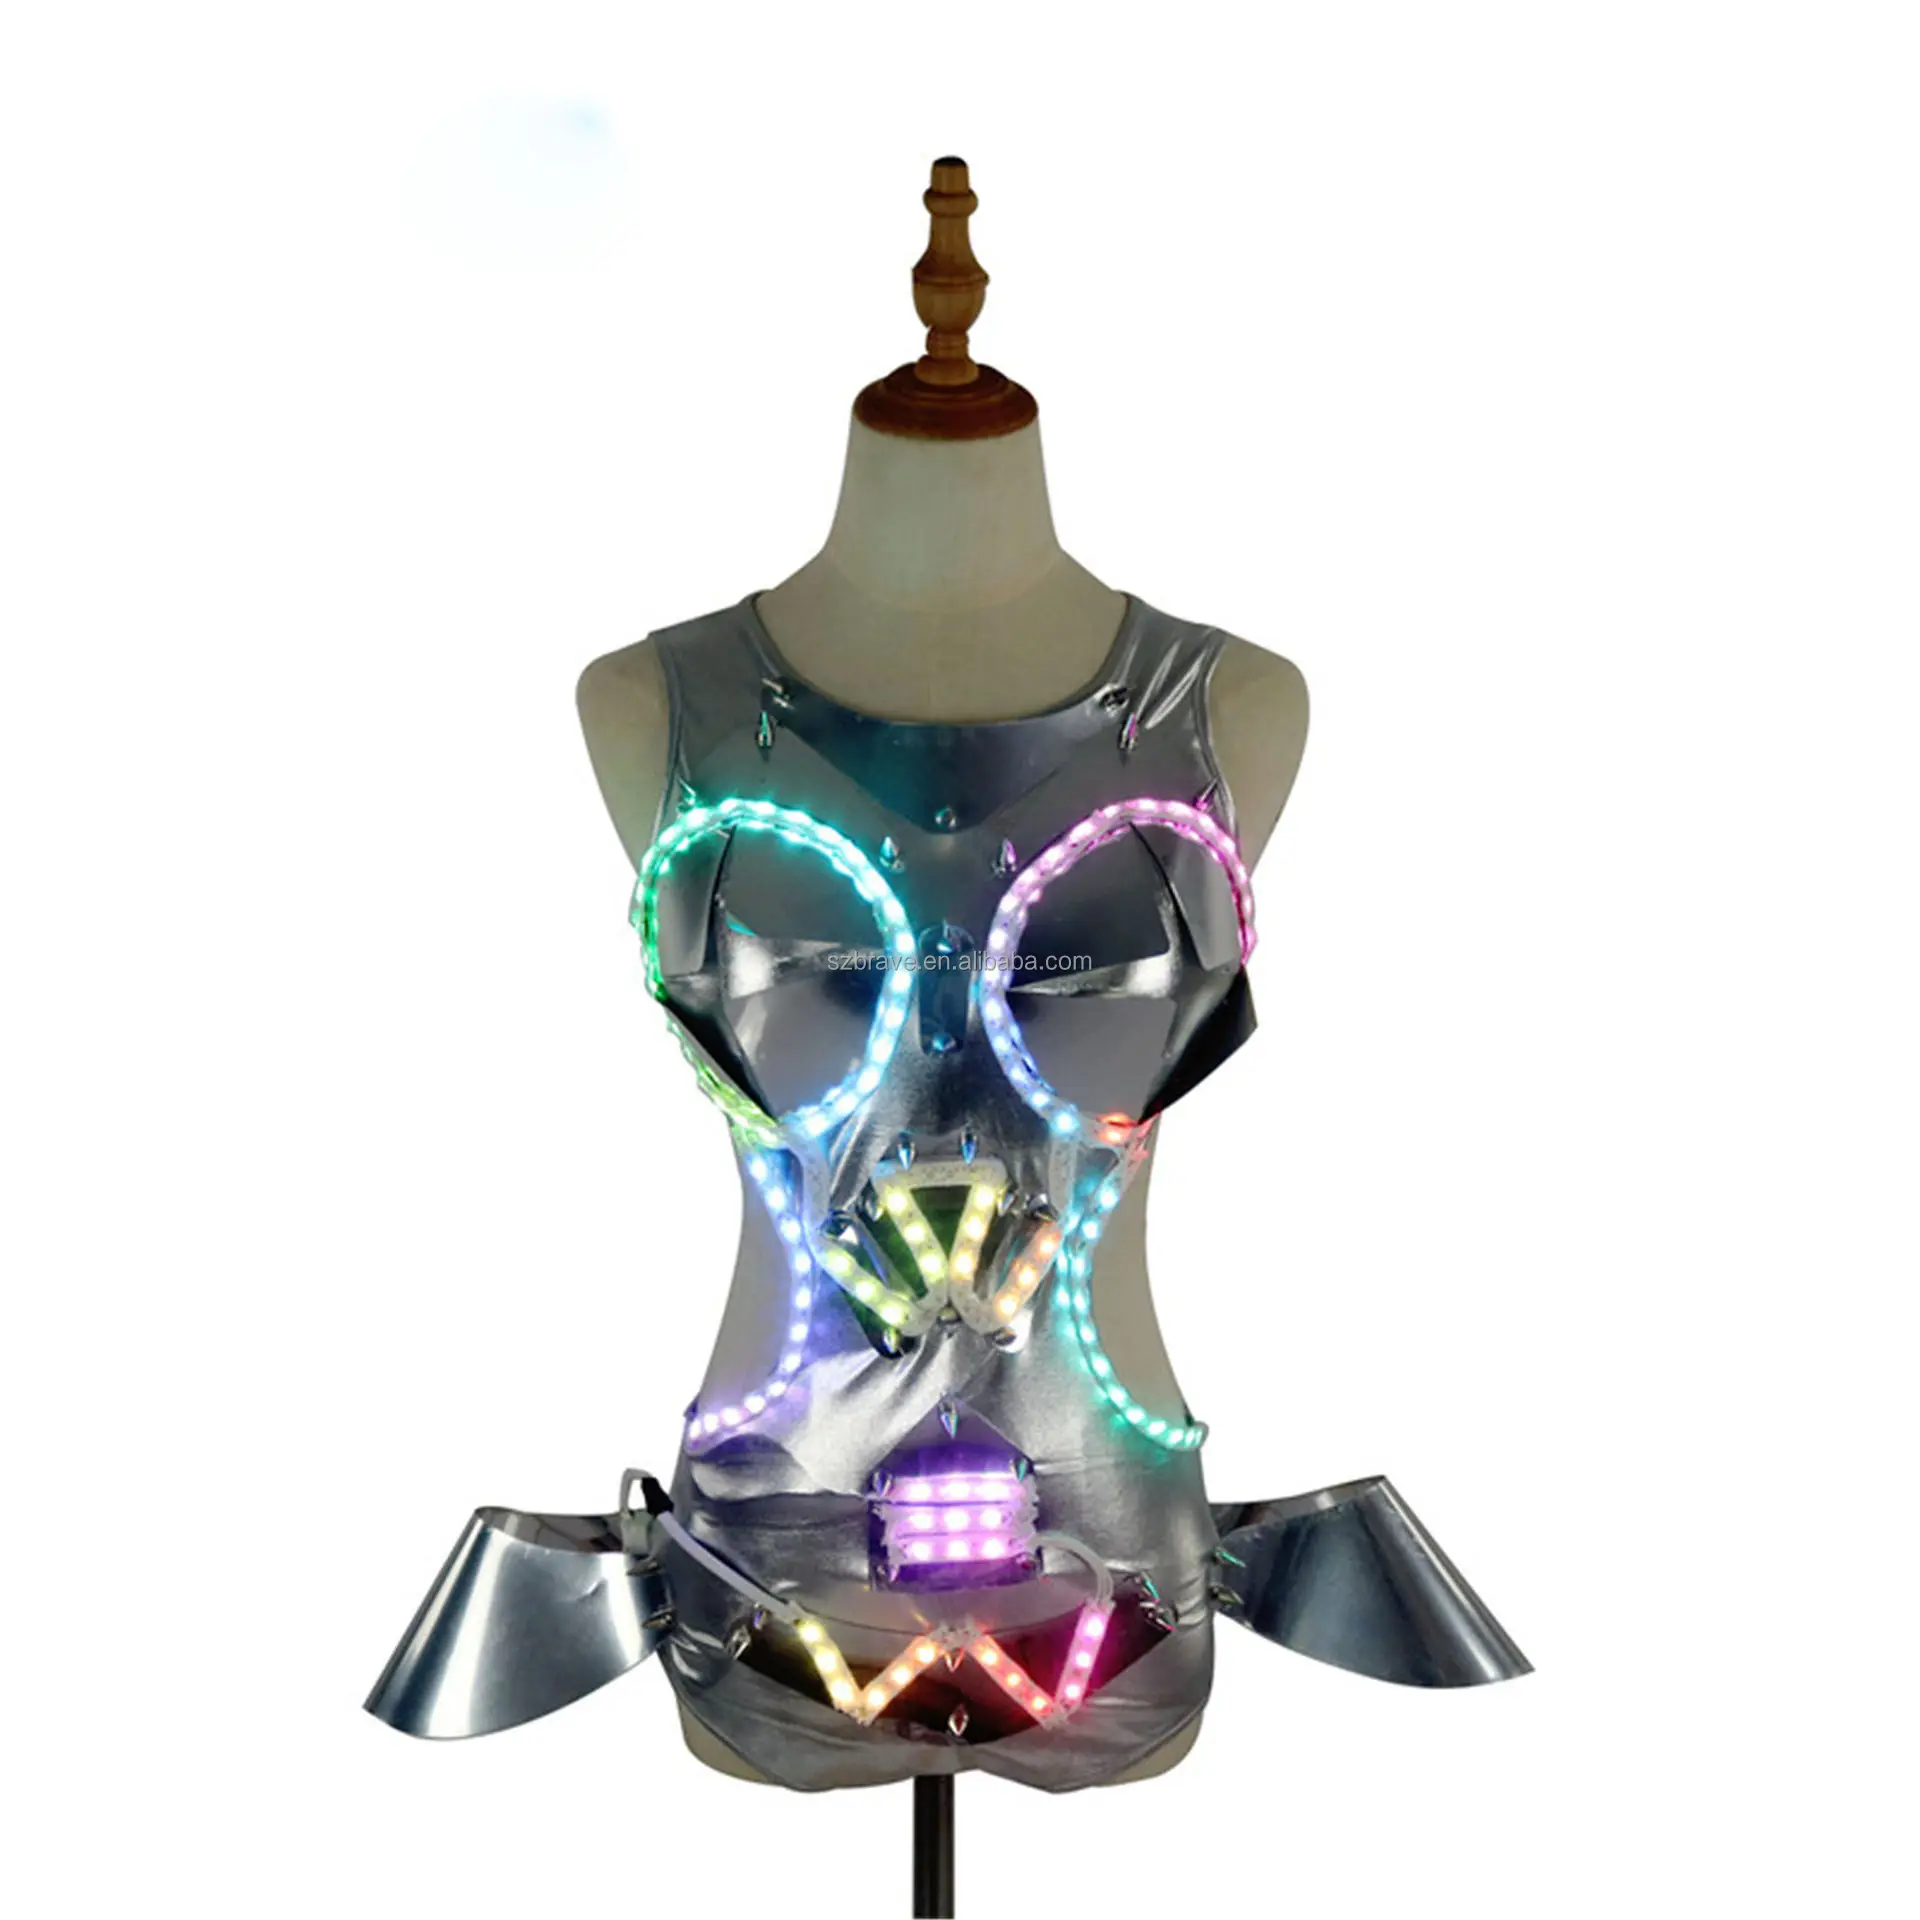 LED lighting costumes female garments night bar ds fluorescent clothing sexy dj female singer party props